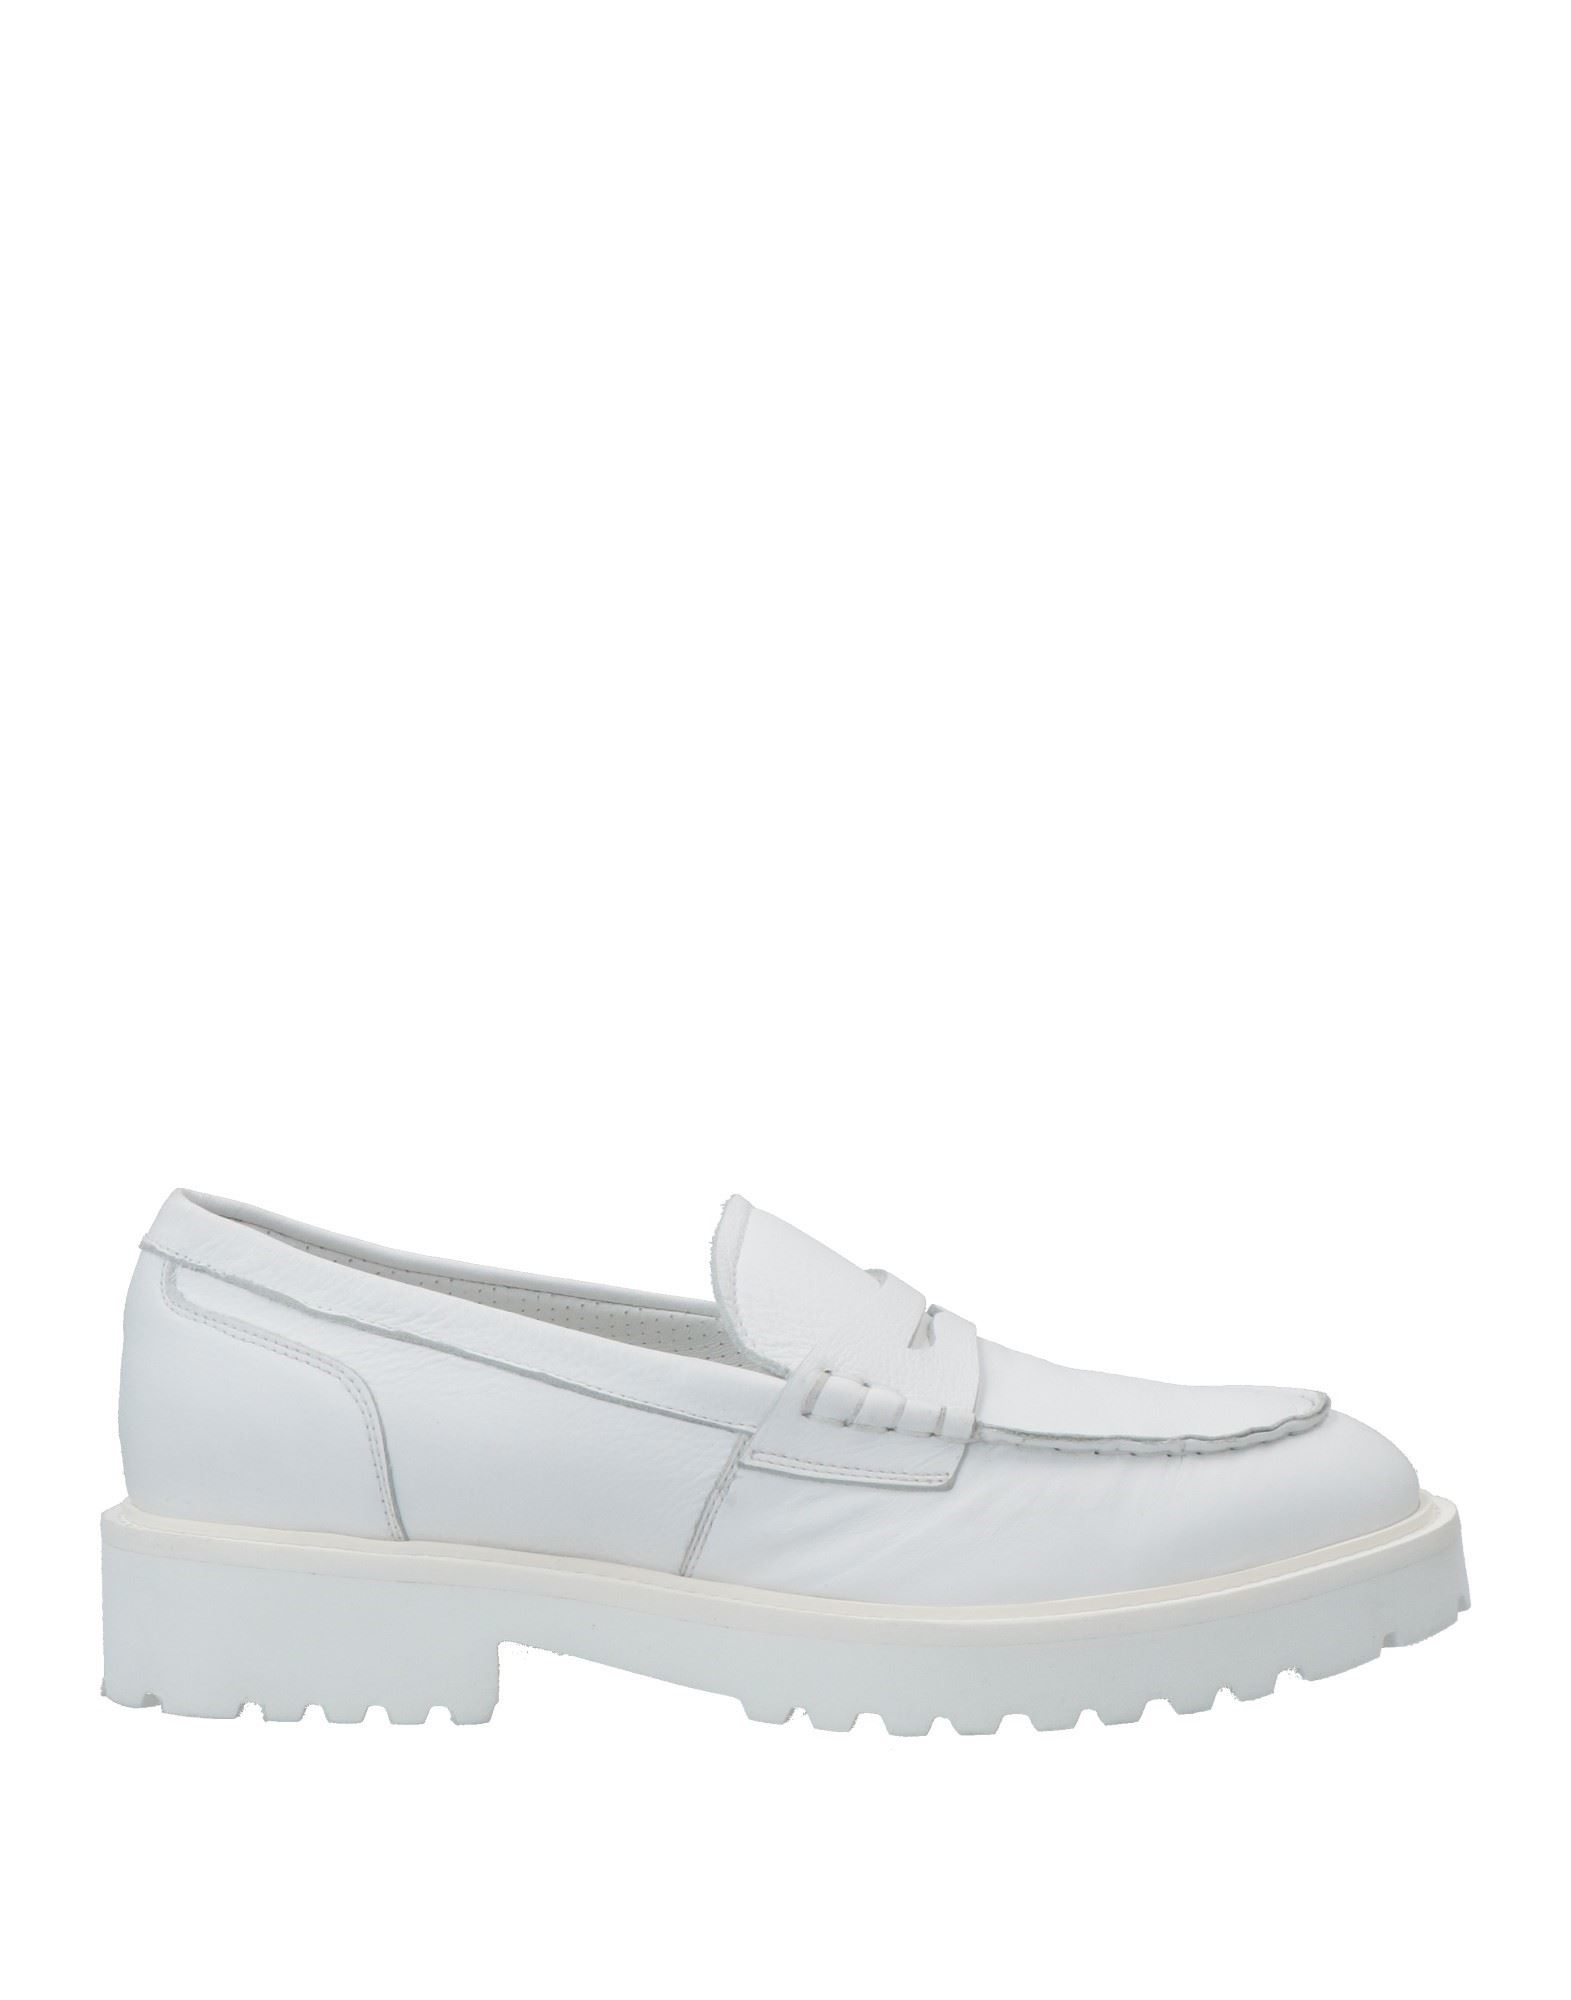 Doucal's Woman Loafers White Size 10.5 Soft Leather